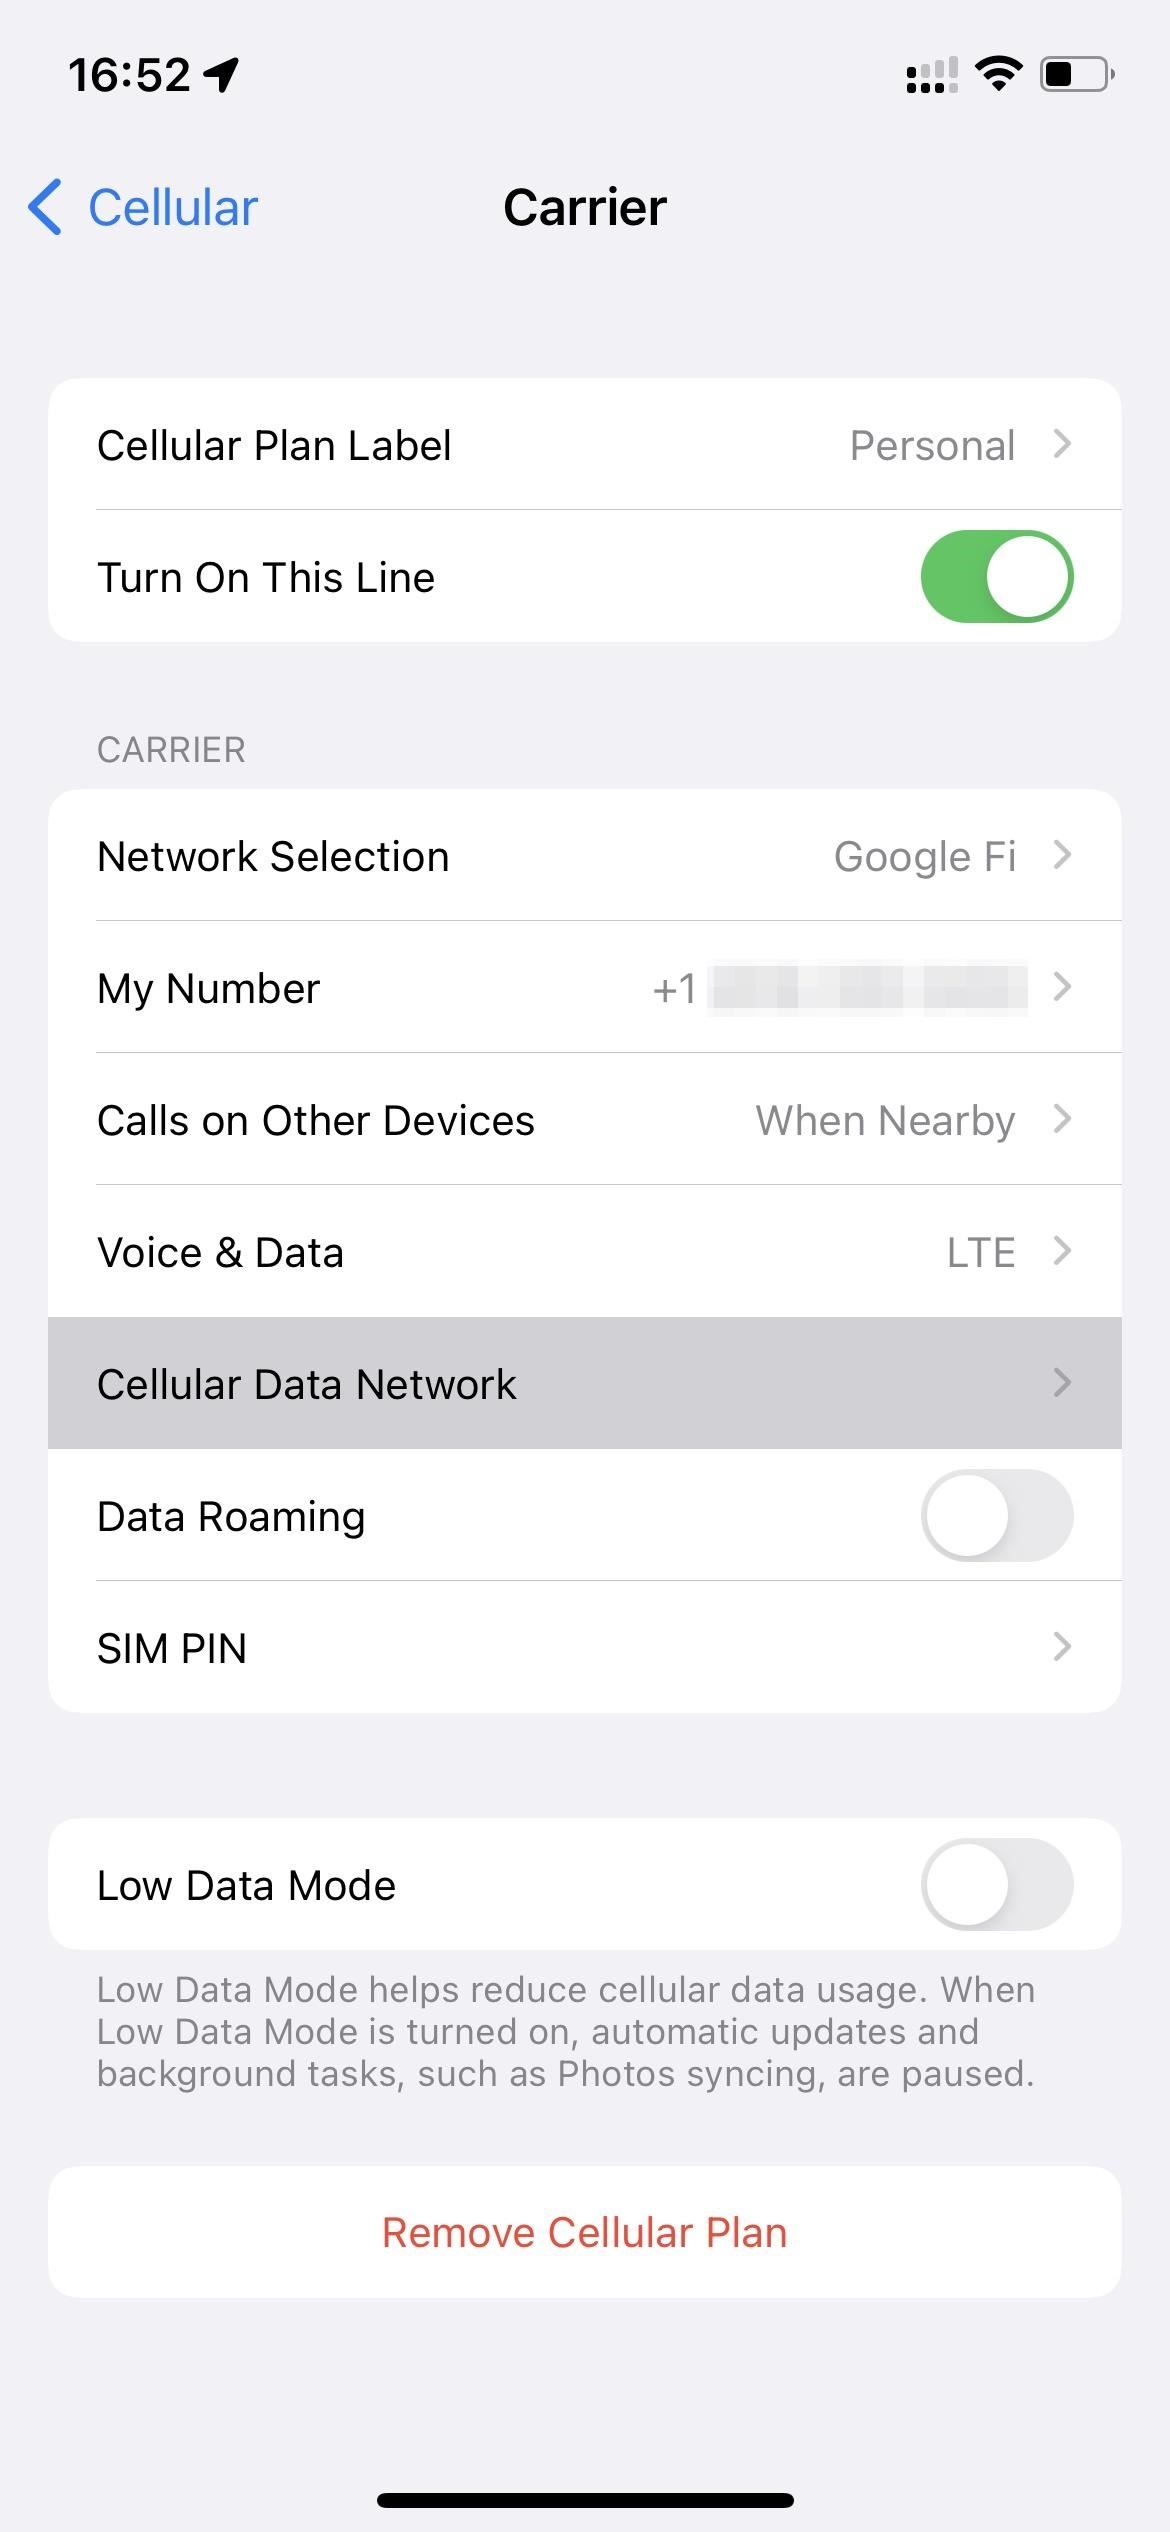 iPhone Not Getting Any Photo Messages? iOS 15 Updates Disable MMS on Google Fi & Other Carriers — Here's the Fix